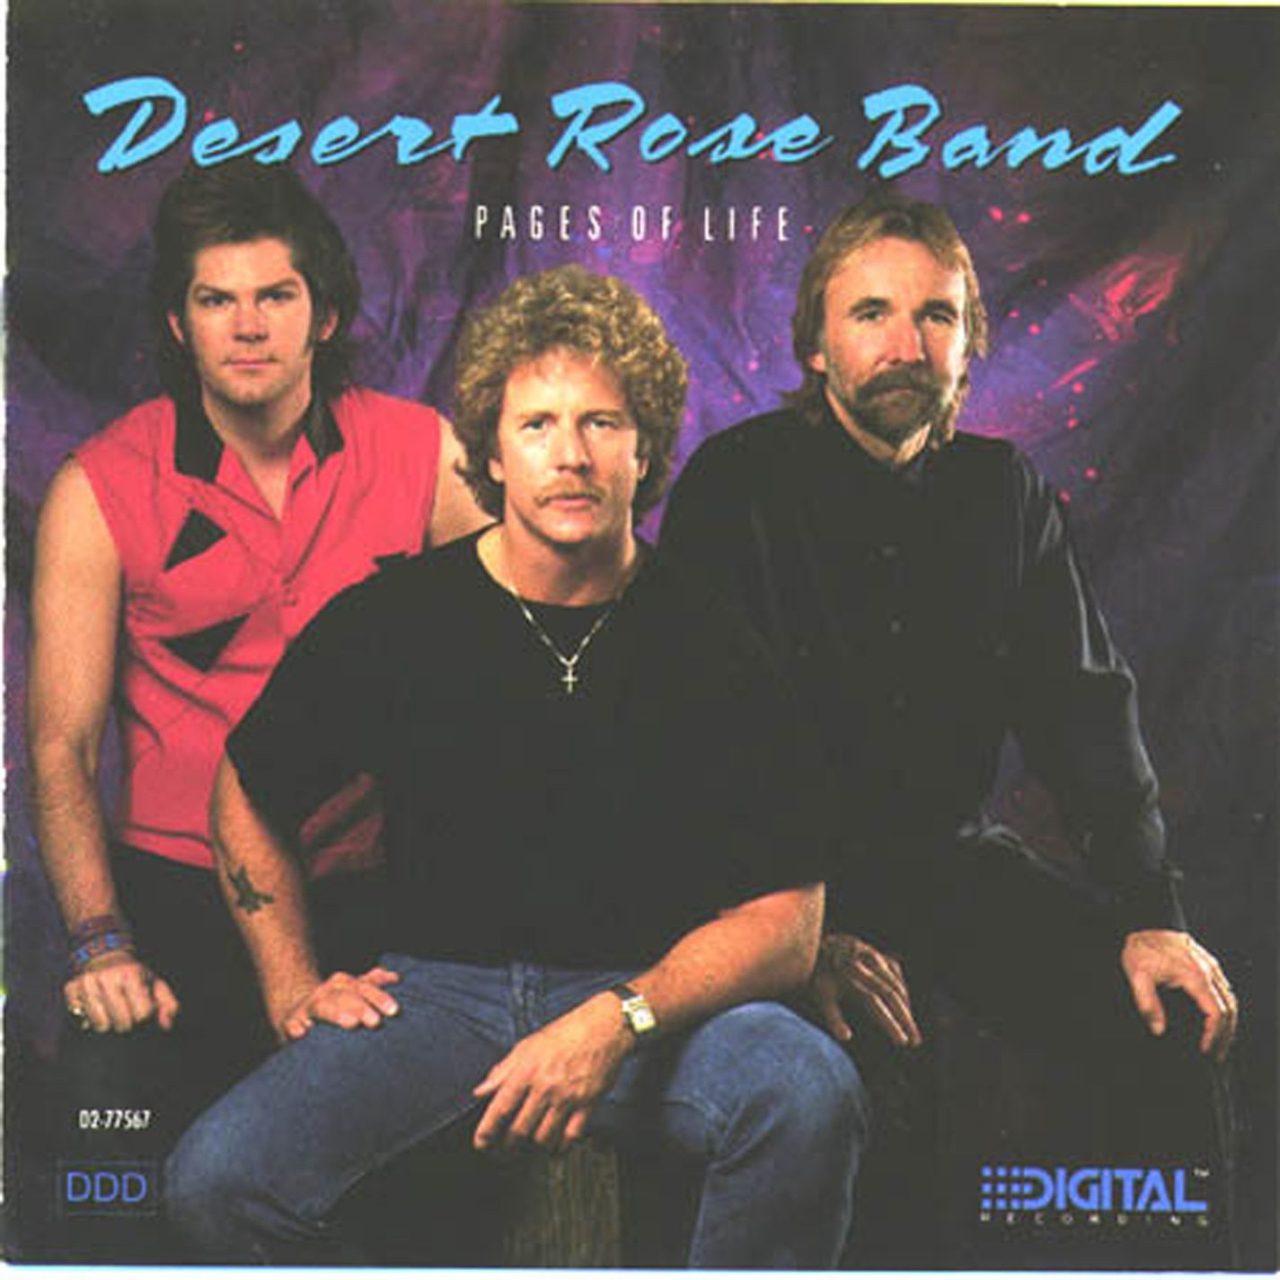 Desert Rose Band – Pages Of Life cover album